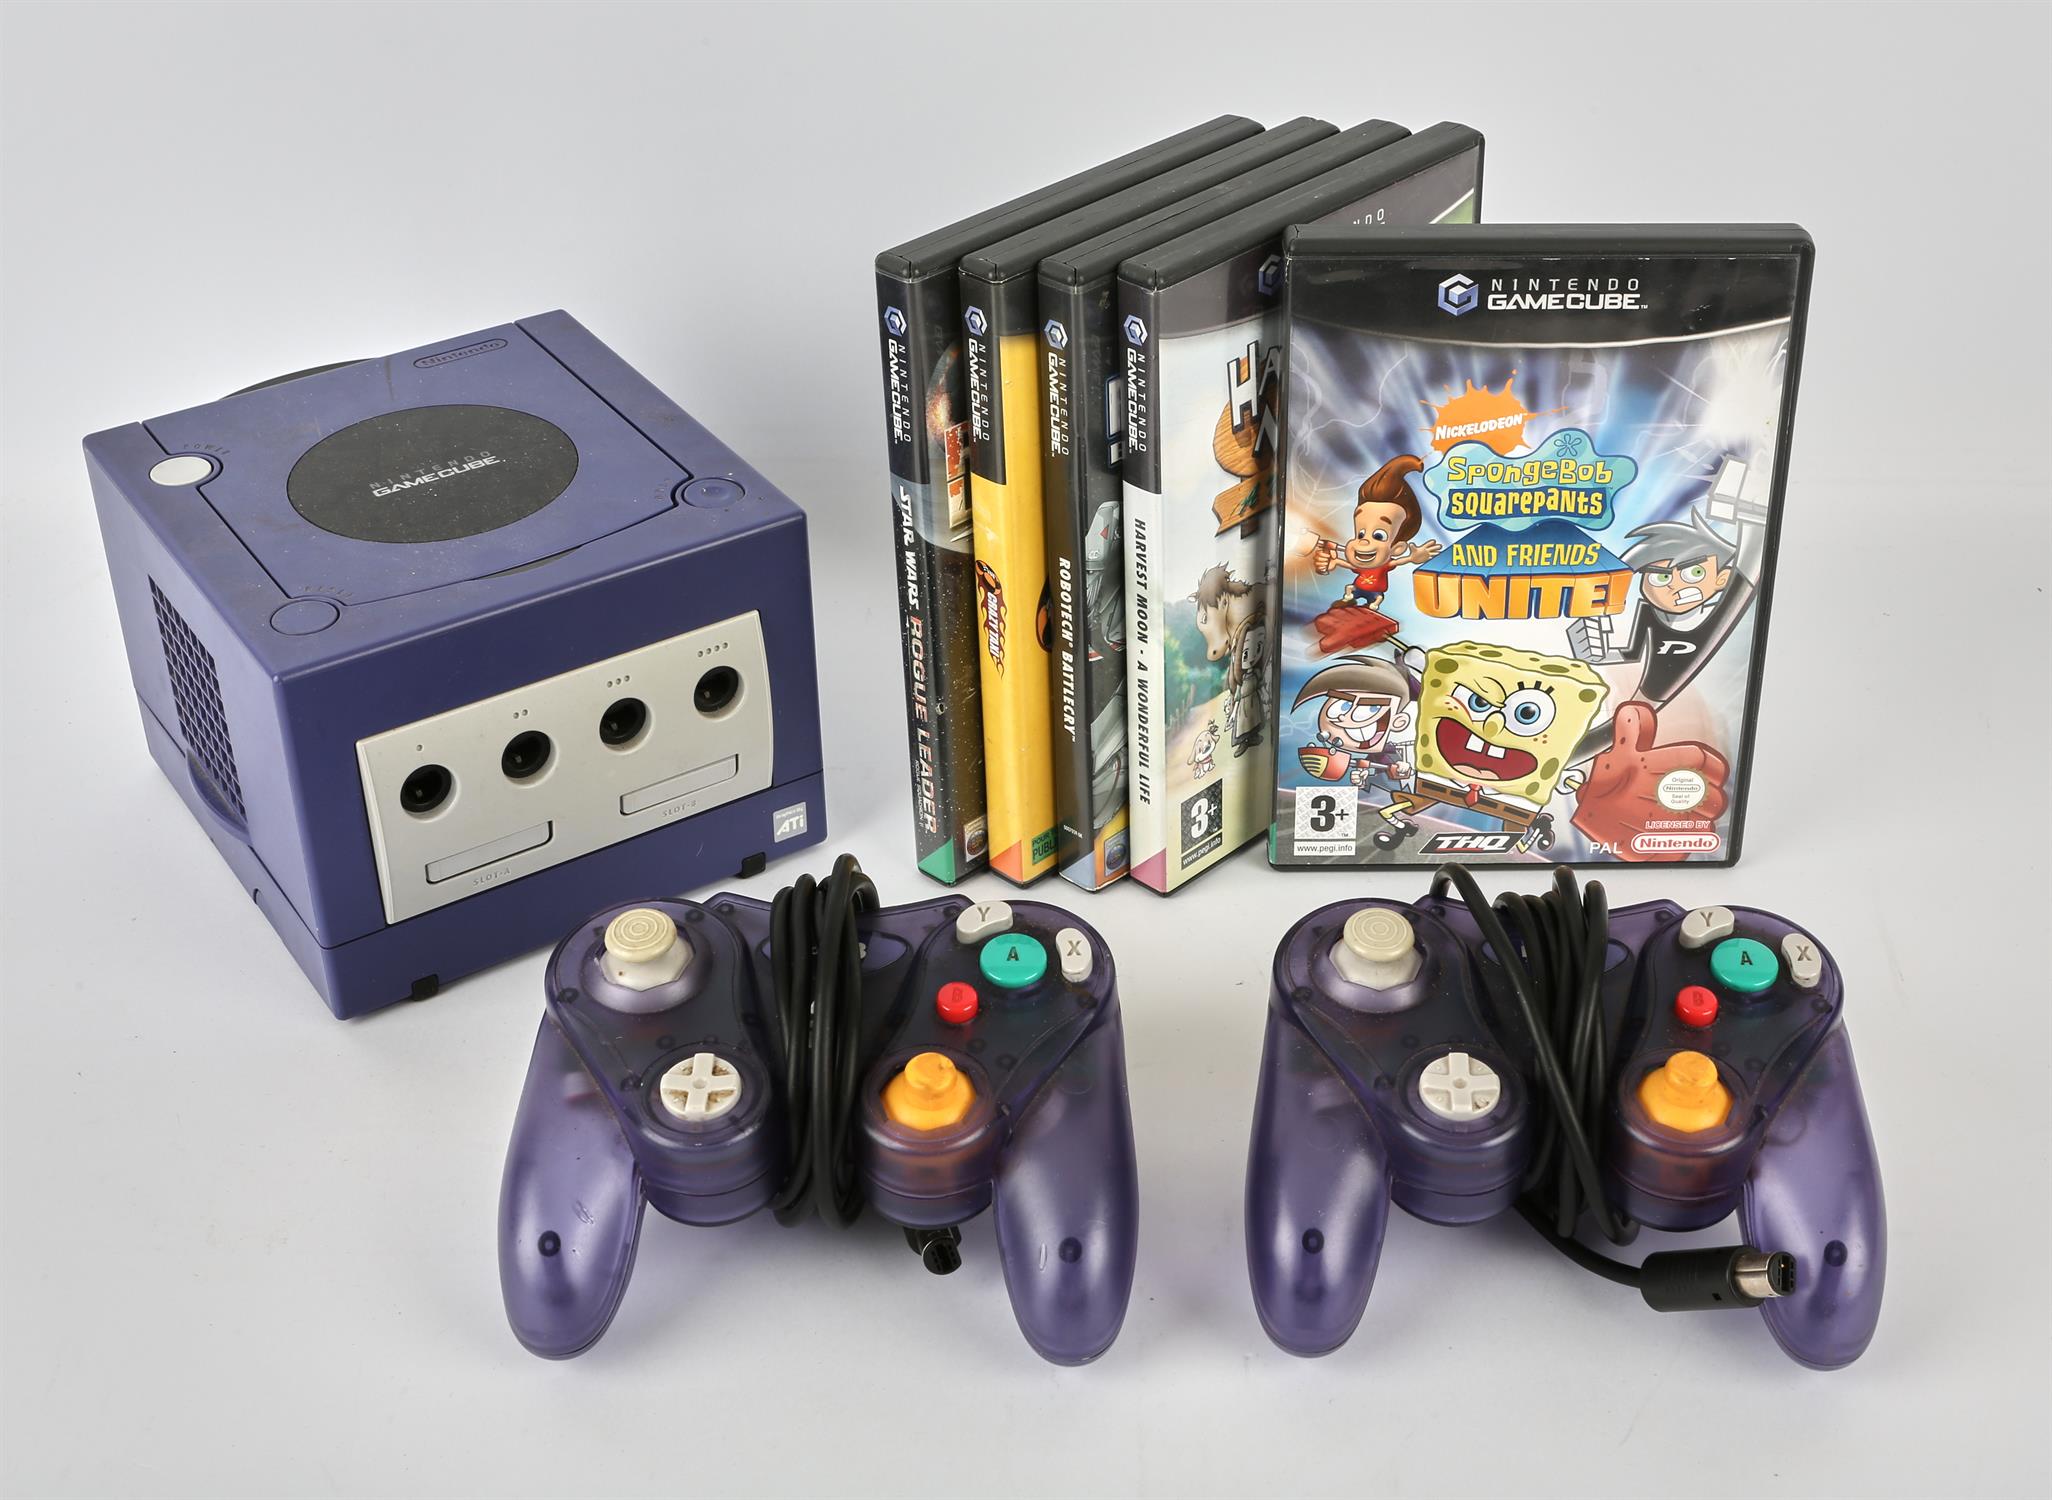 Nintendo GameCube Console [Indigo] with 2 third-party controllers and 5 games (PAL) and UK power